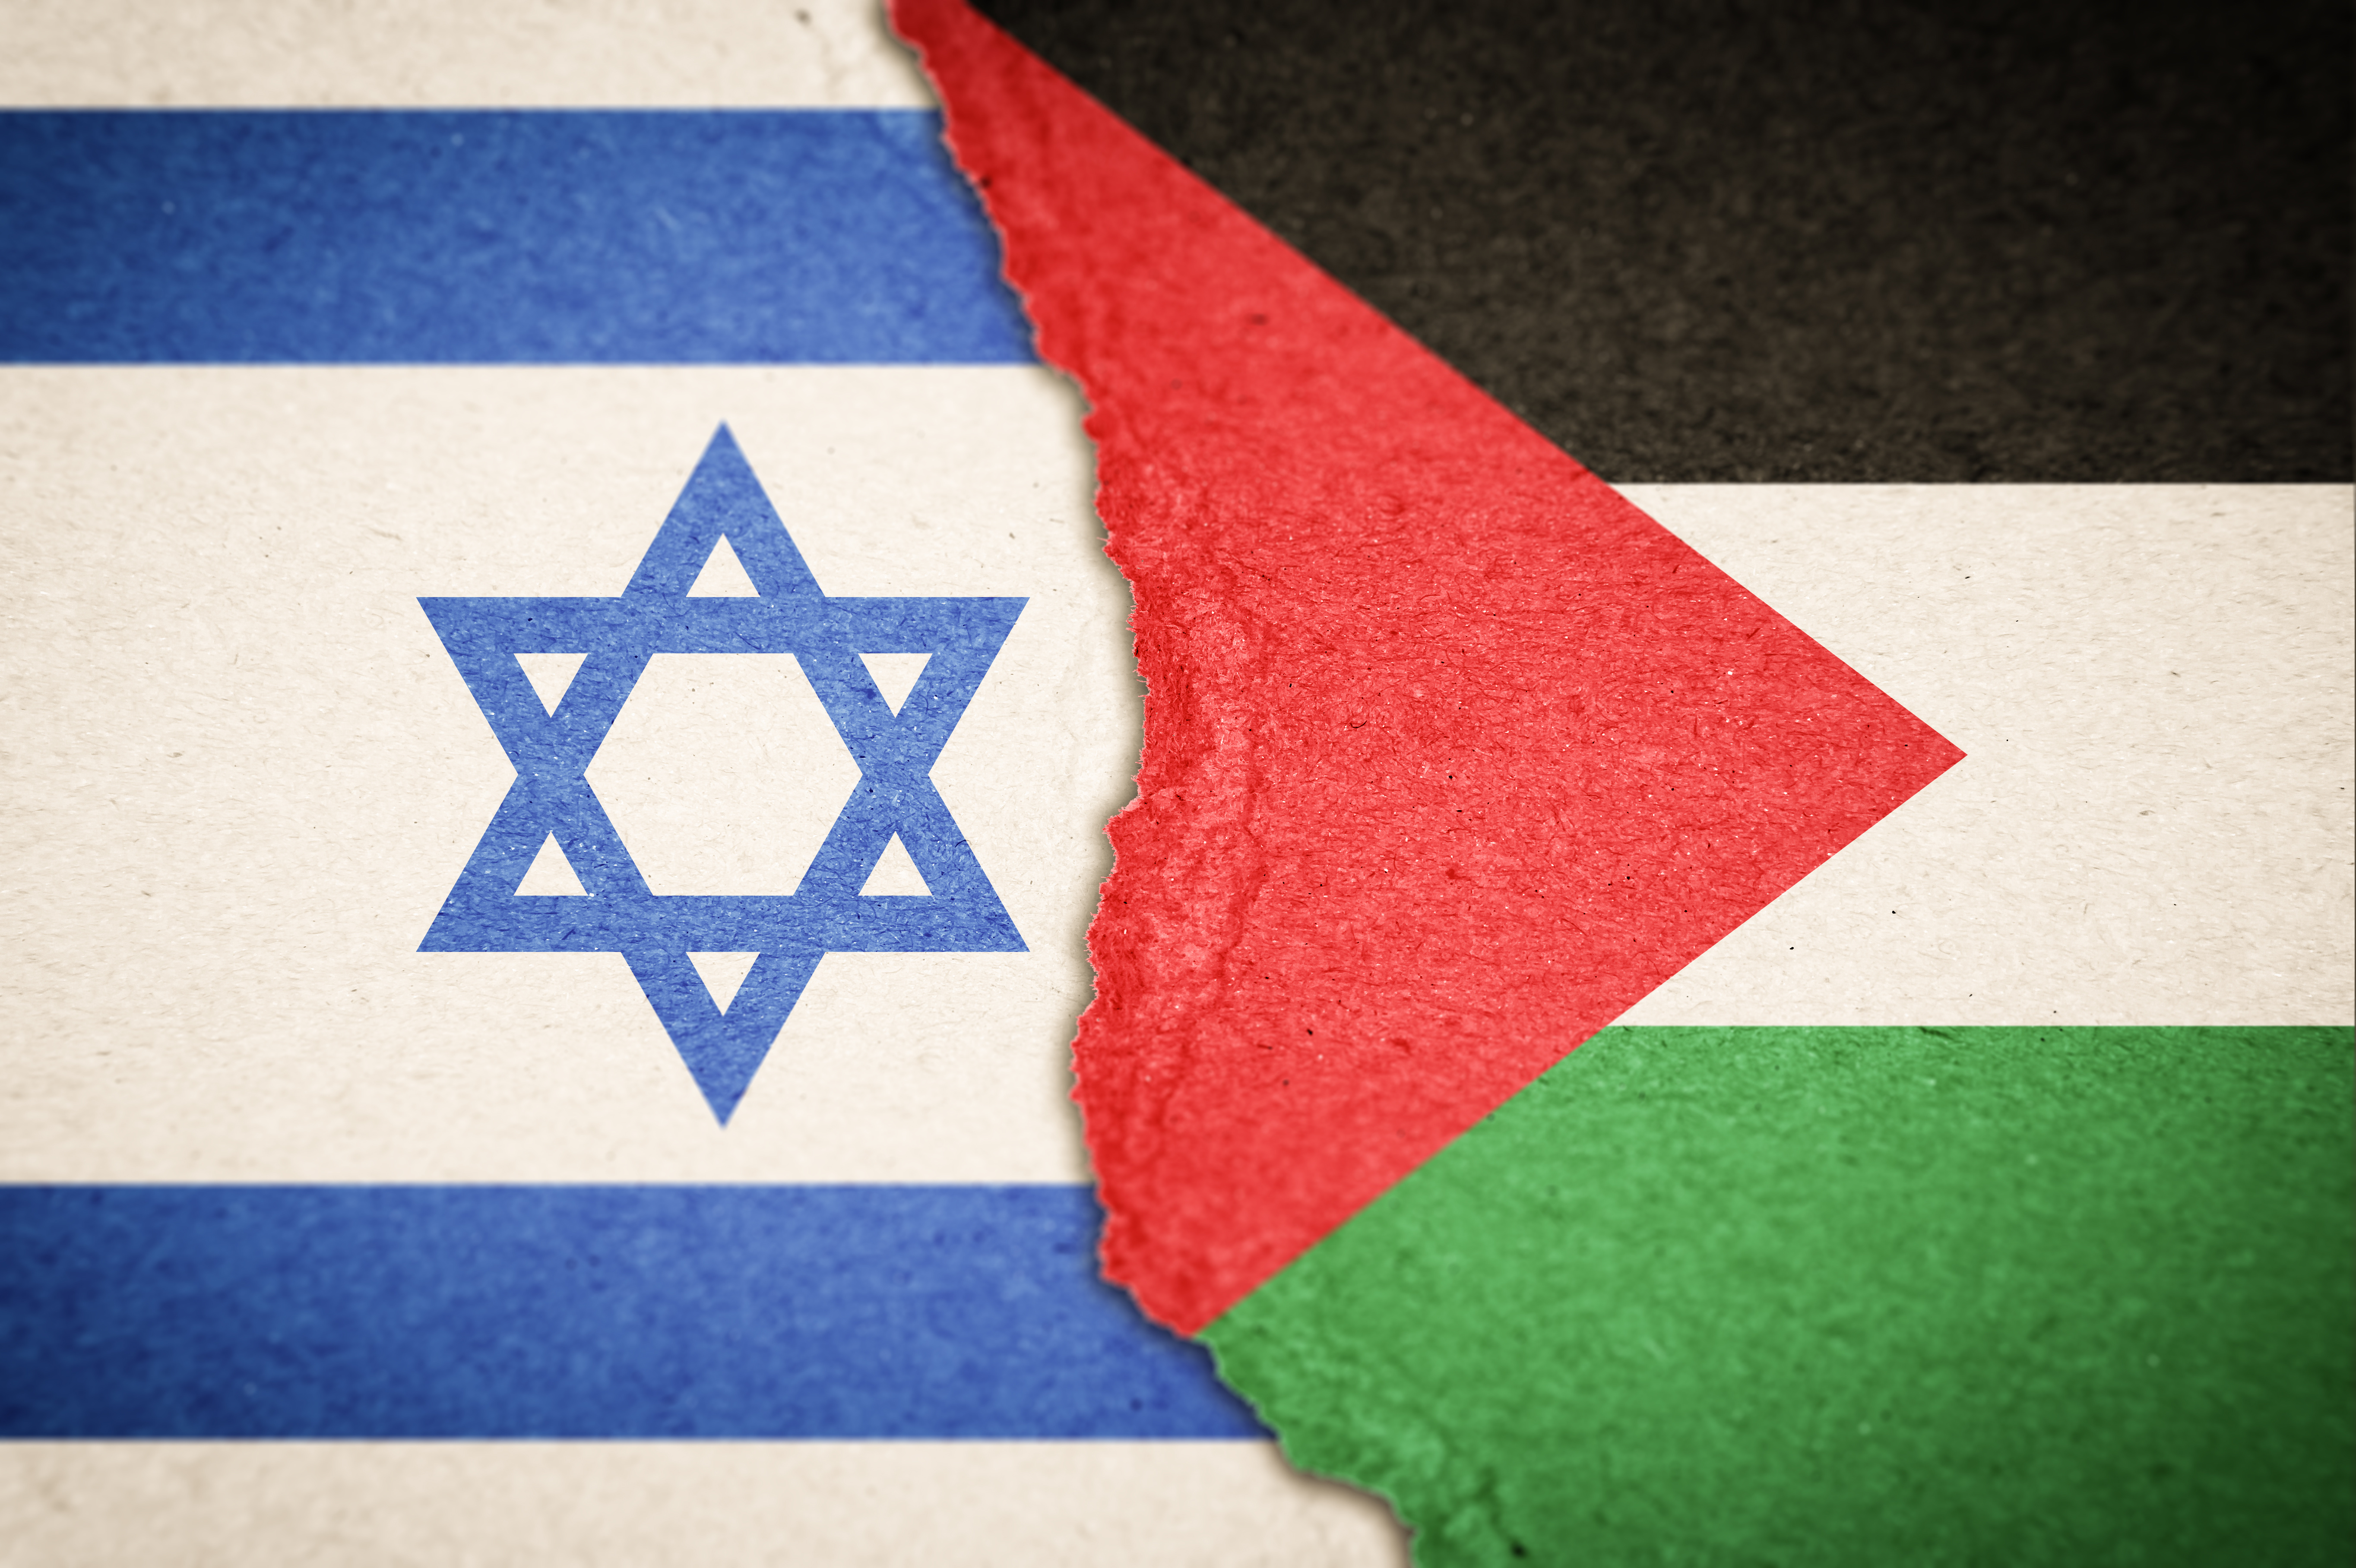 Israel Hamas war is affecting global markets, including cryptocurrencies.